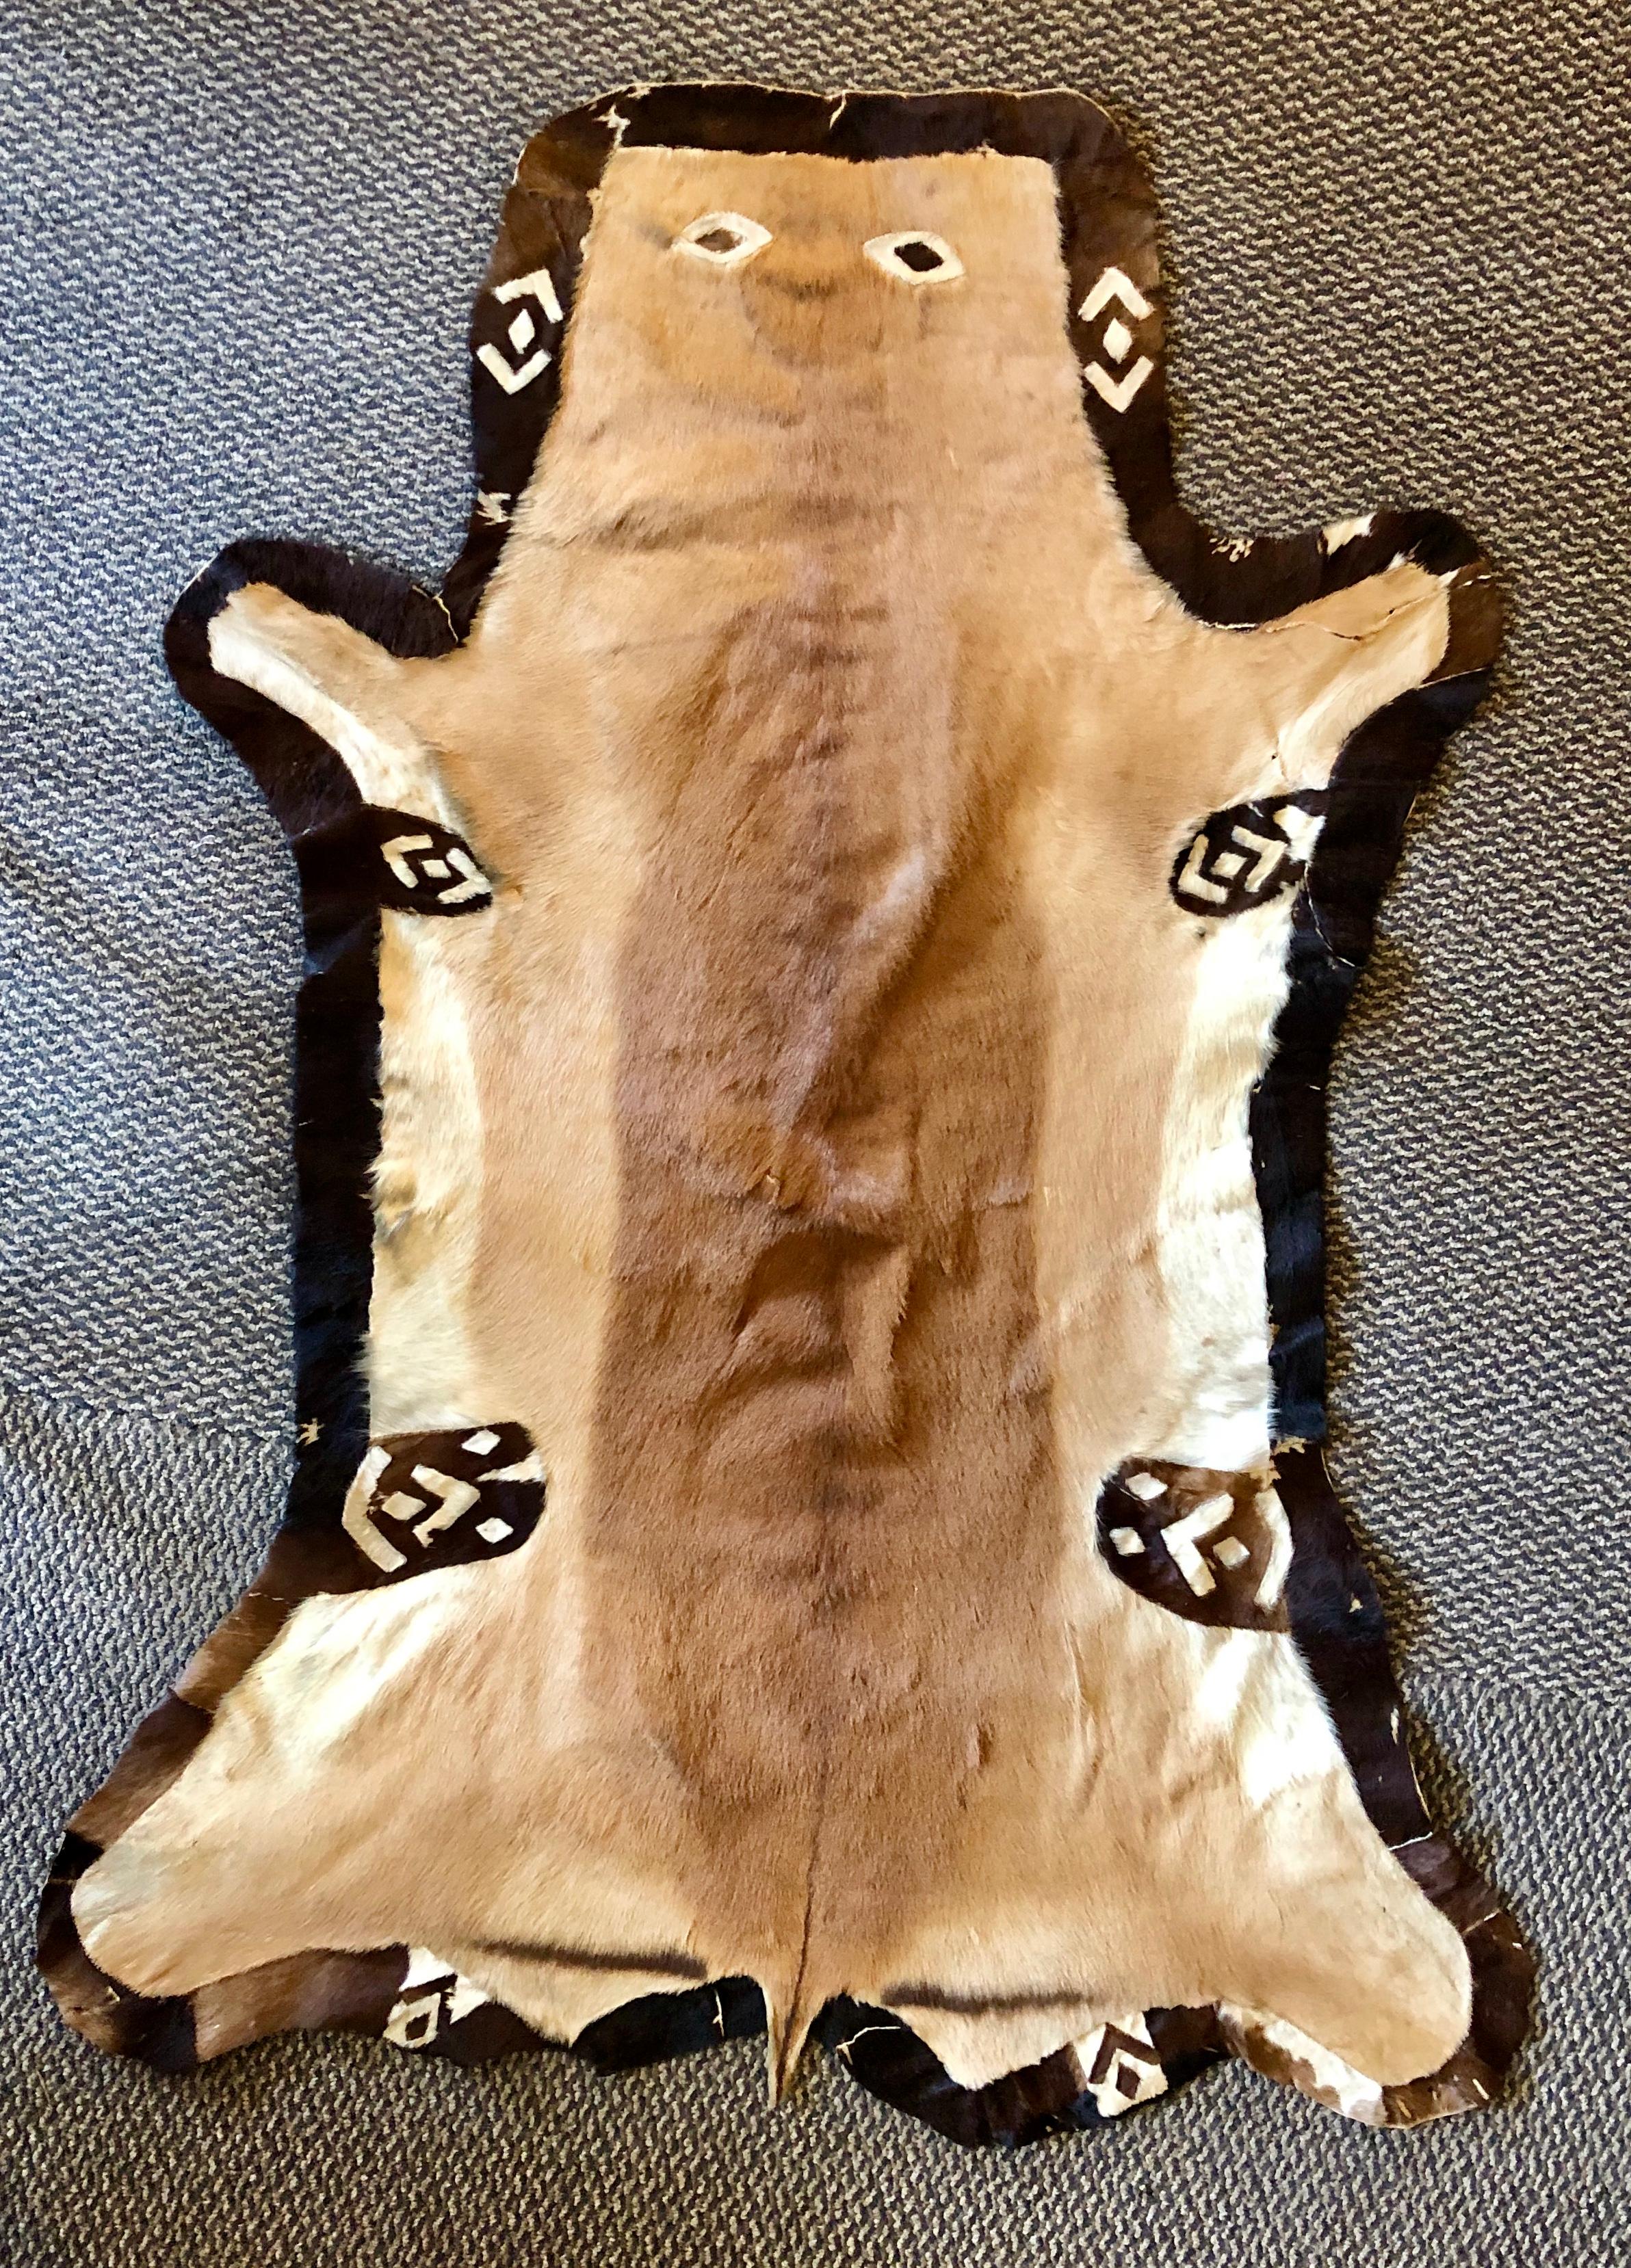 Stitch animal skin rug or carpet with a happy face. This hand stitched animal skin doesn't seem to mind being captured and placed on a floor or hung on the wall as she is seemingly smiling. Much different than the norm as this piece has a lining and